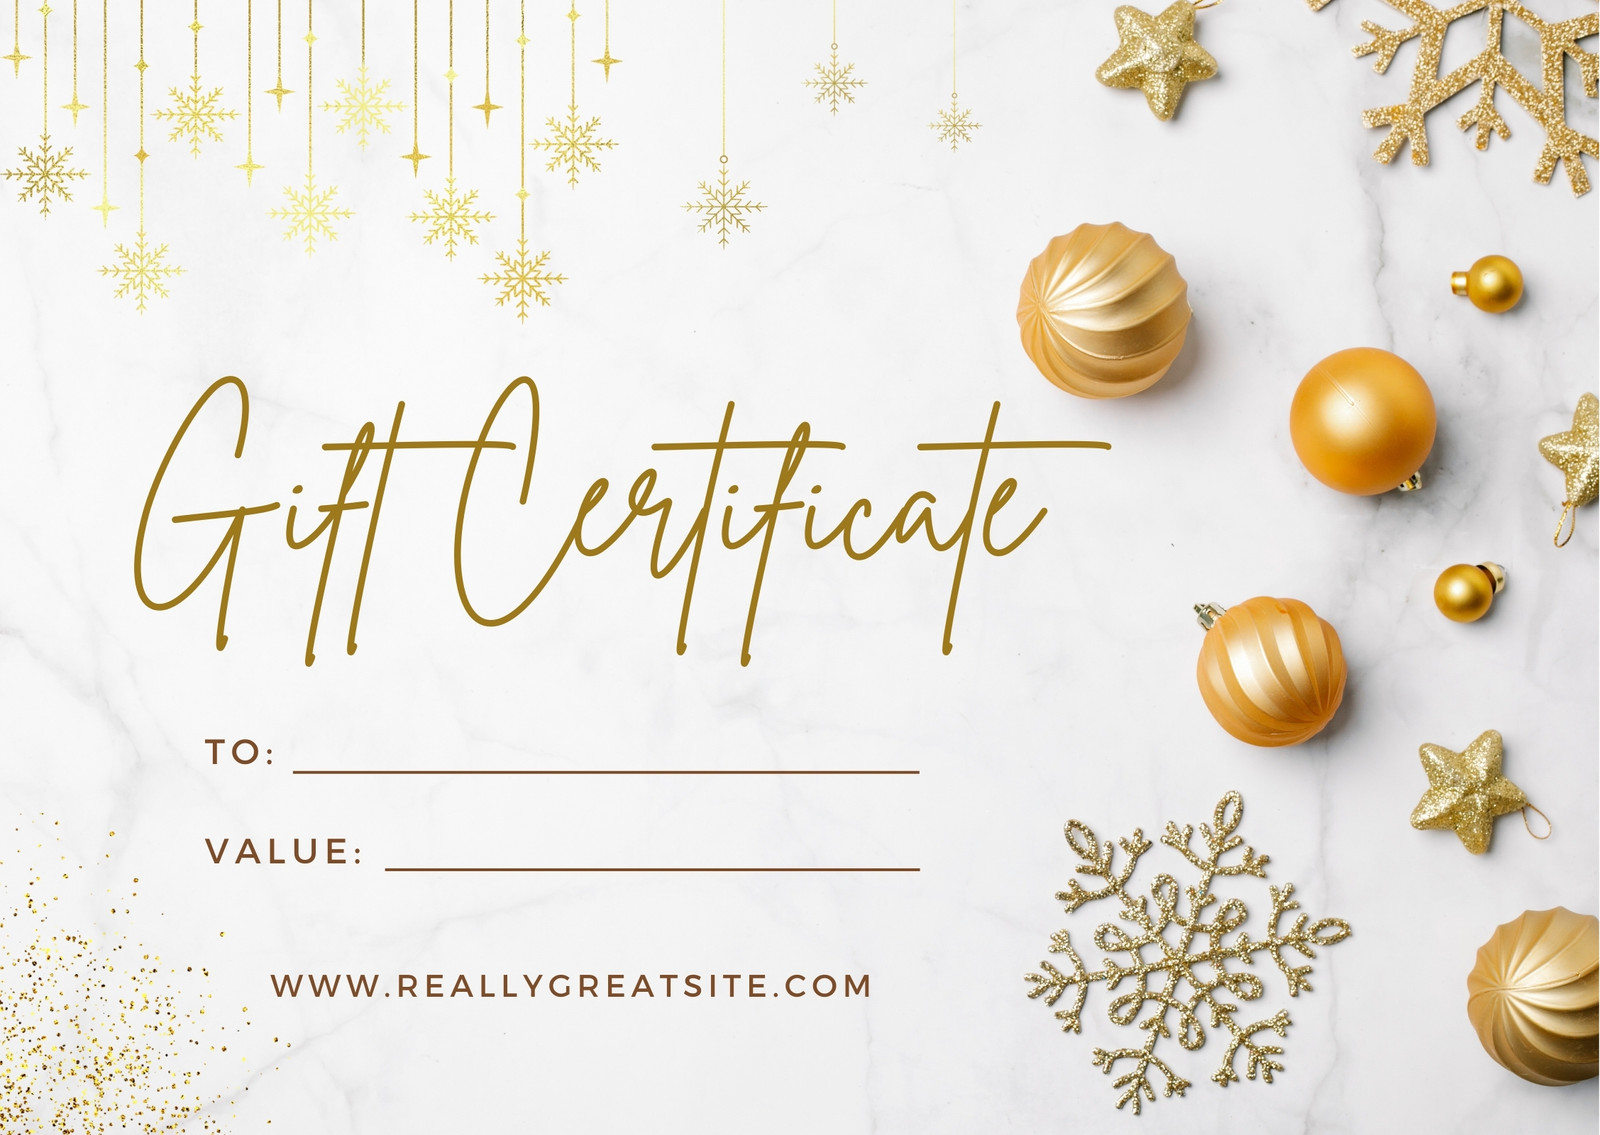 Christmas Gift Certificate Stock Vector Illustration and Royalty Free  Christmas Gift Certificate Clipart